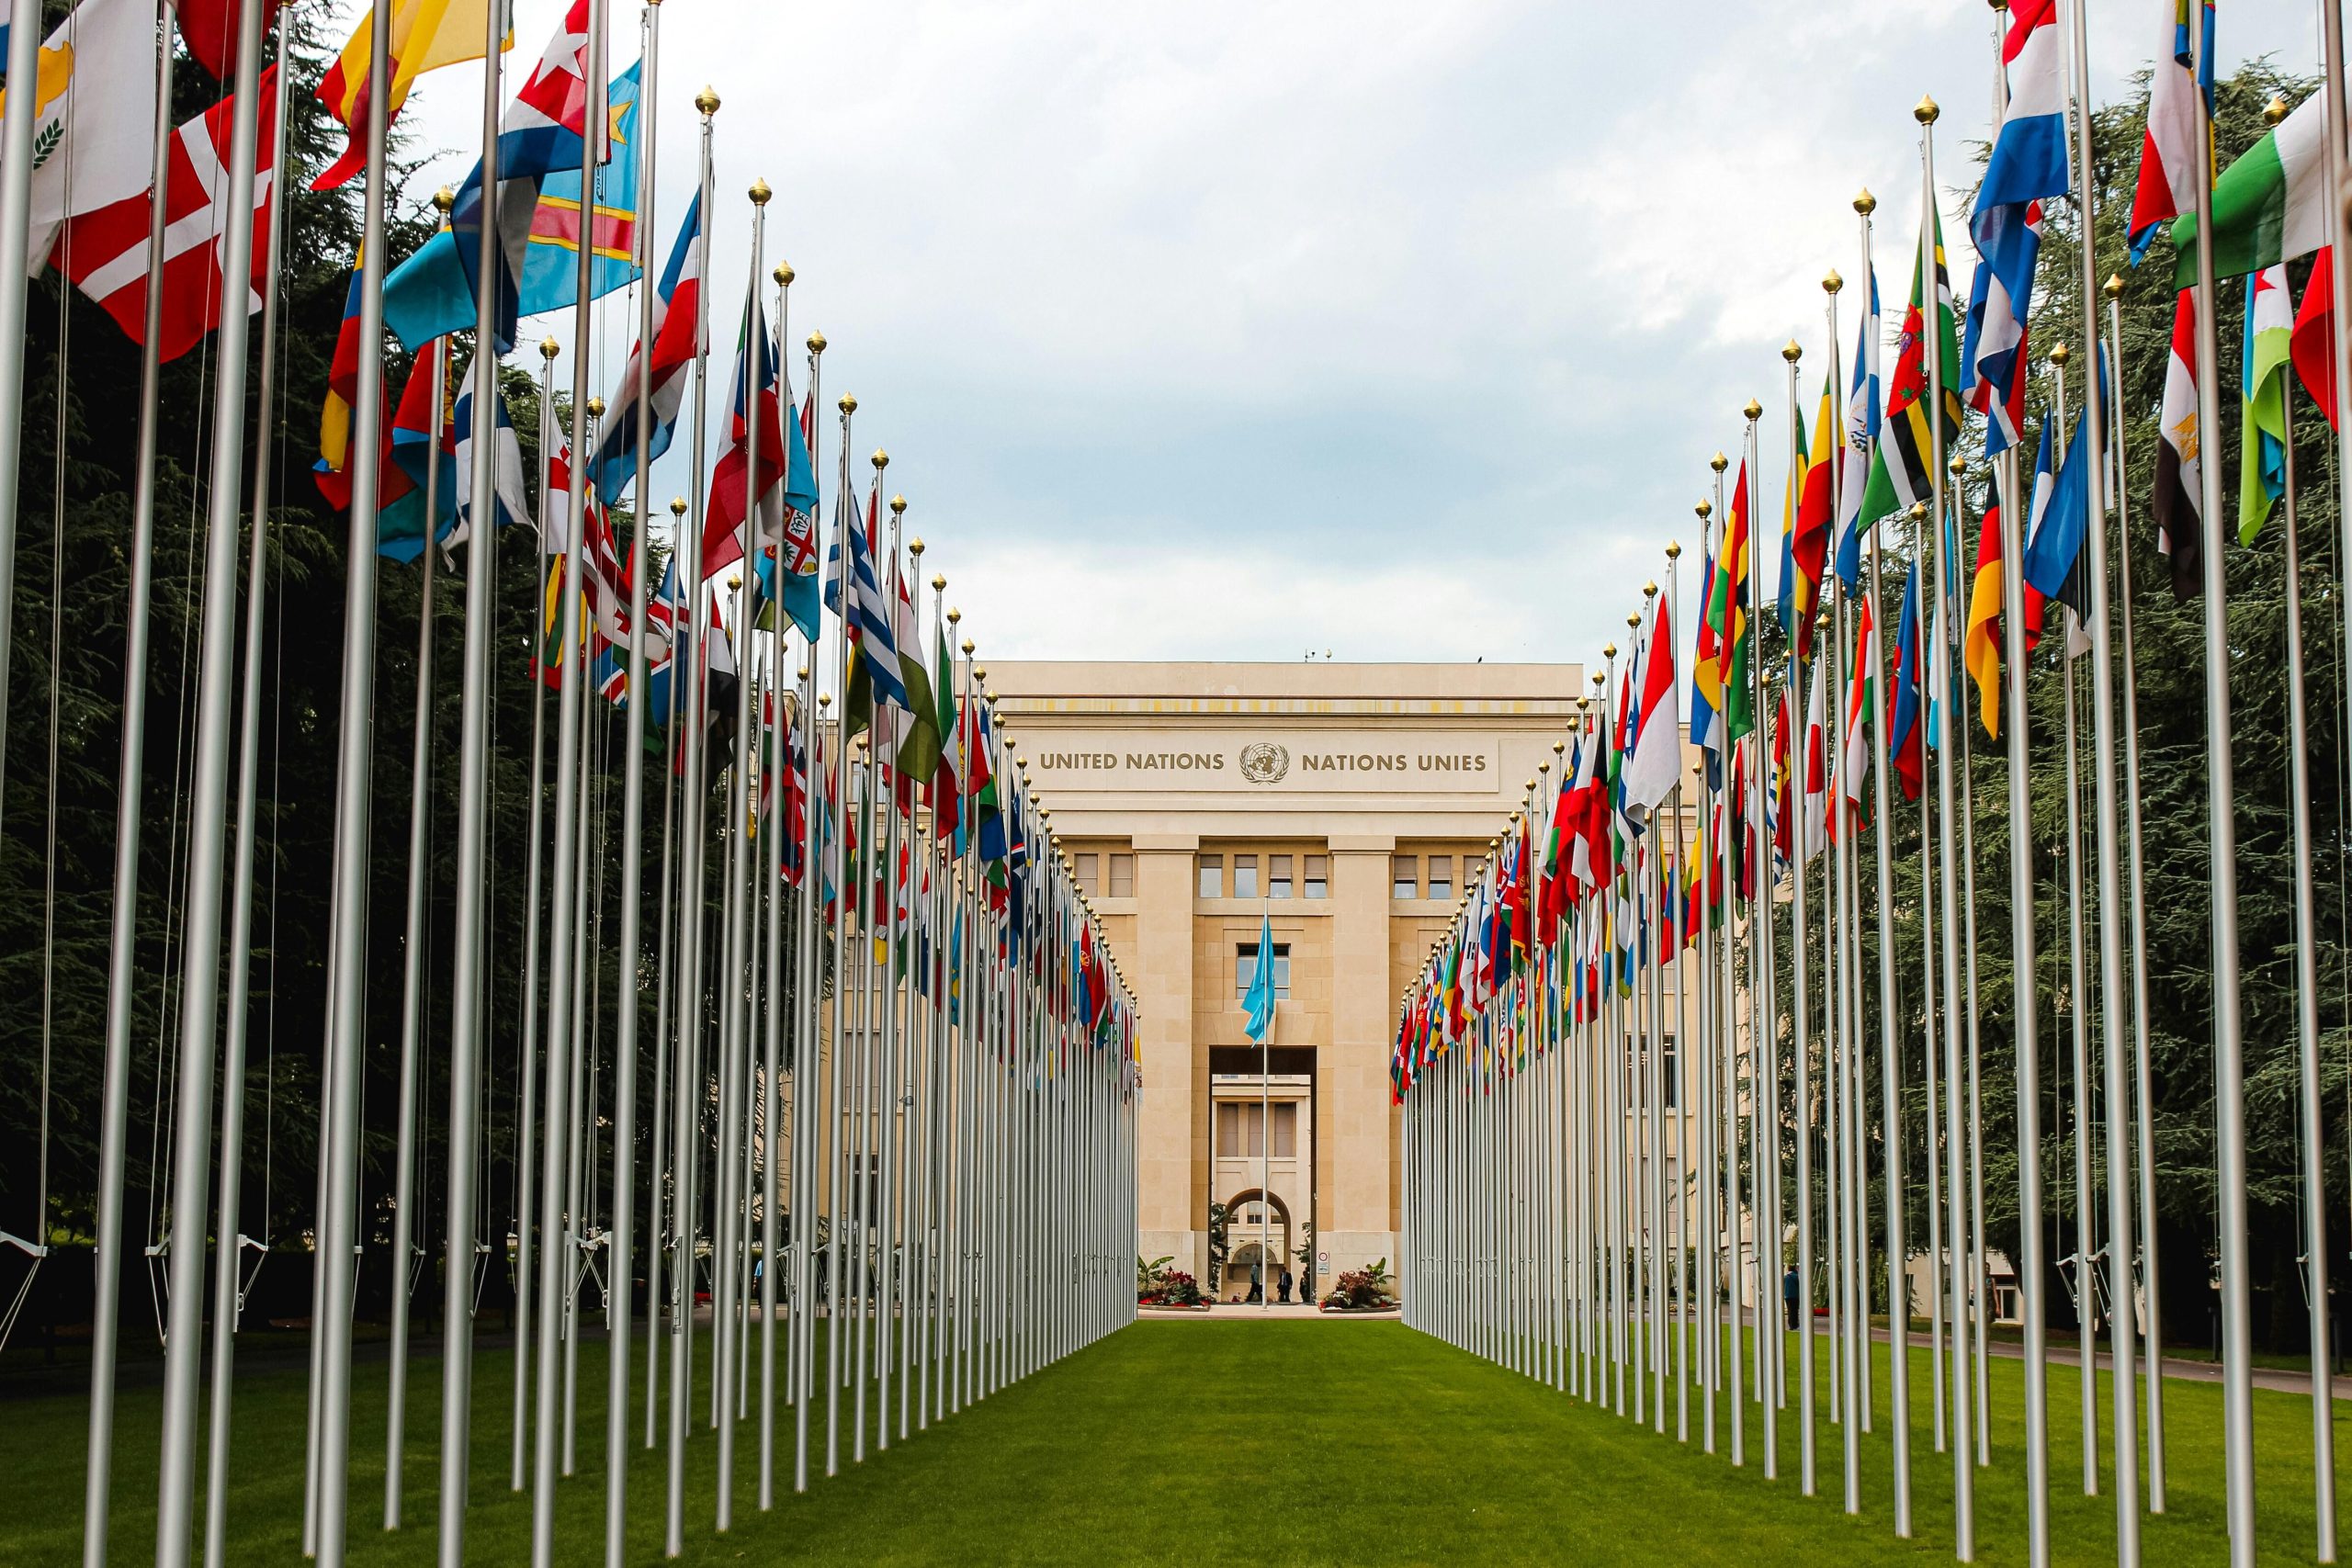 Image showing the United Nations building and multiple country flags to represent international organisations